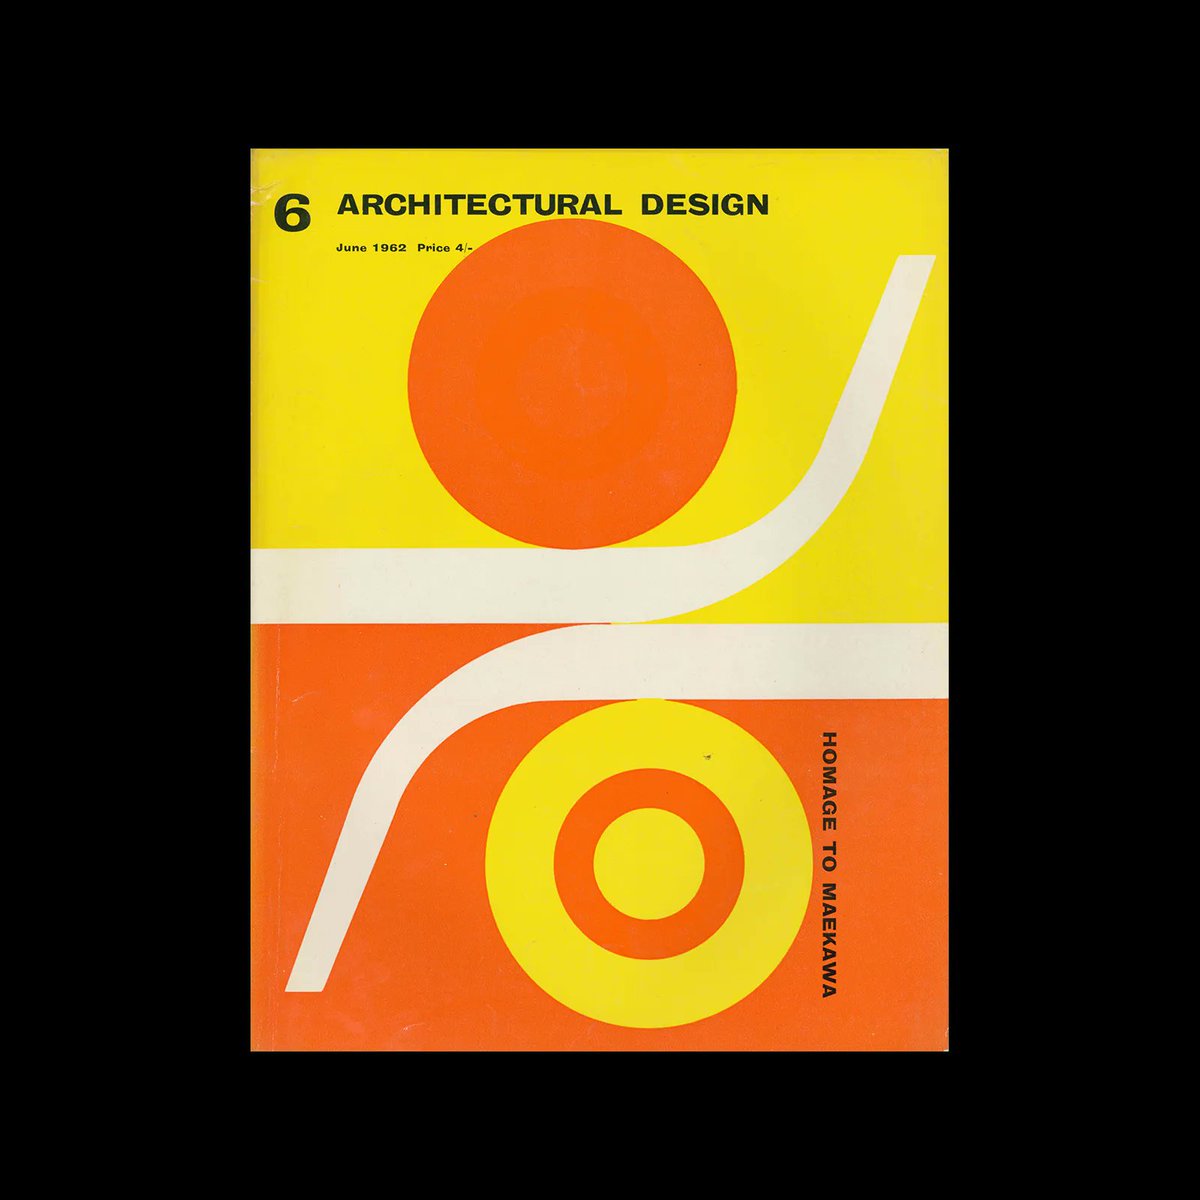 Architectural Design, June 1962. Cover design by Theo Crosby #theocrosby
designreviewed.com/artefacts/arch…